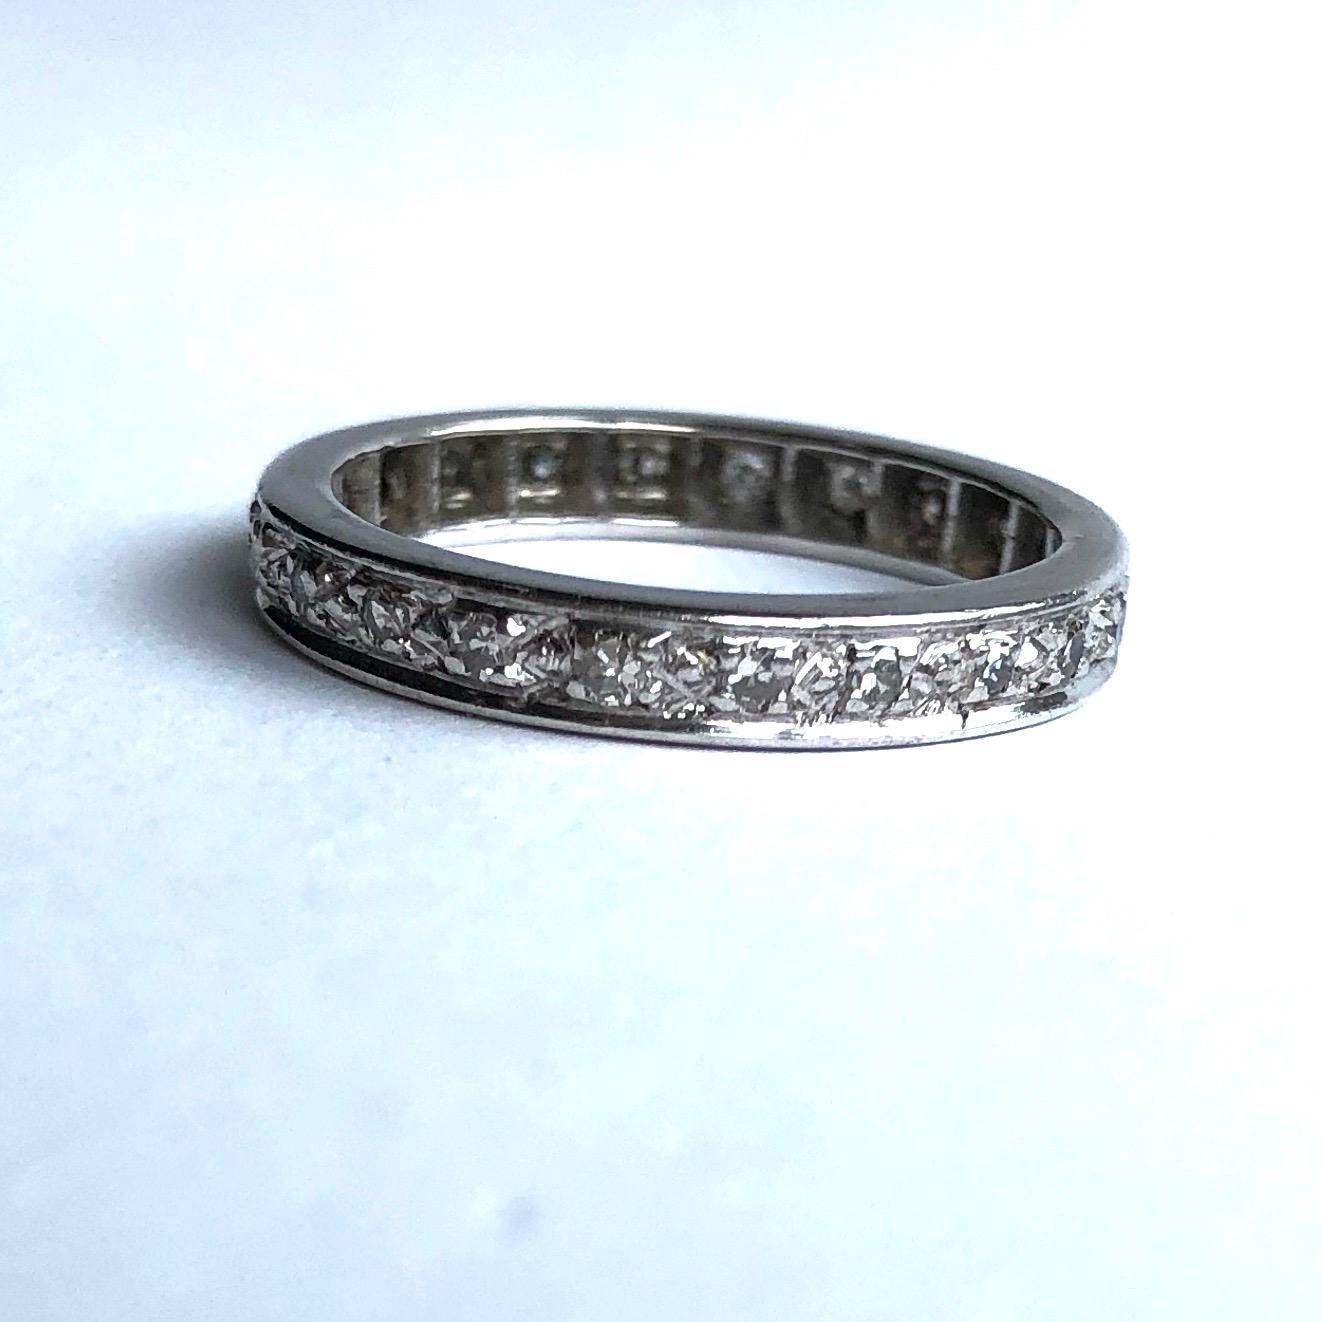 This classic diamond eternity would make a sparkly everyday wear or a fancy wedding band. Perfect to stack! Each Diamond is approx 3pts. 

Ring Size: N 1/2 or 7
Band Width: 2.5mm

Weight: 2.6g